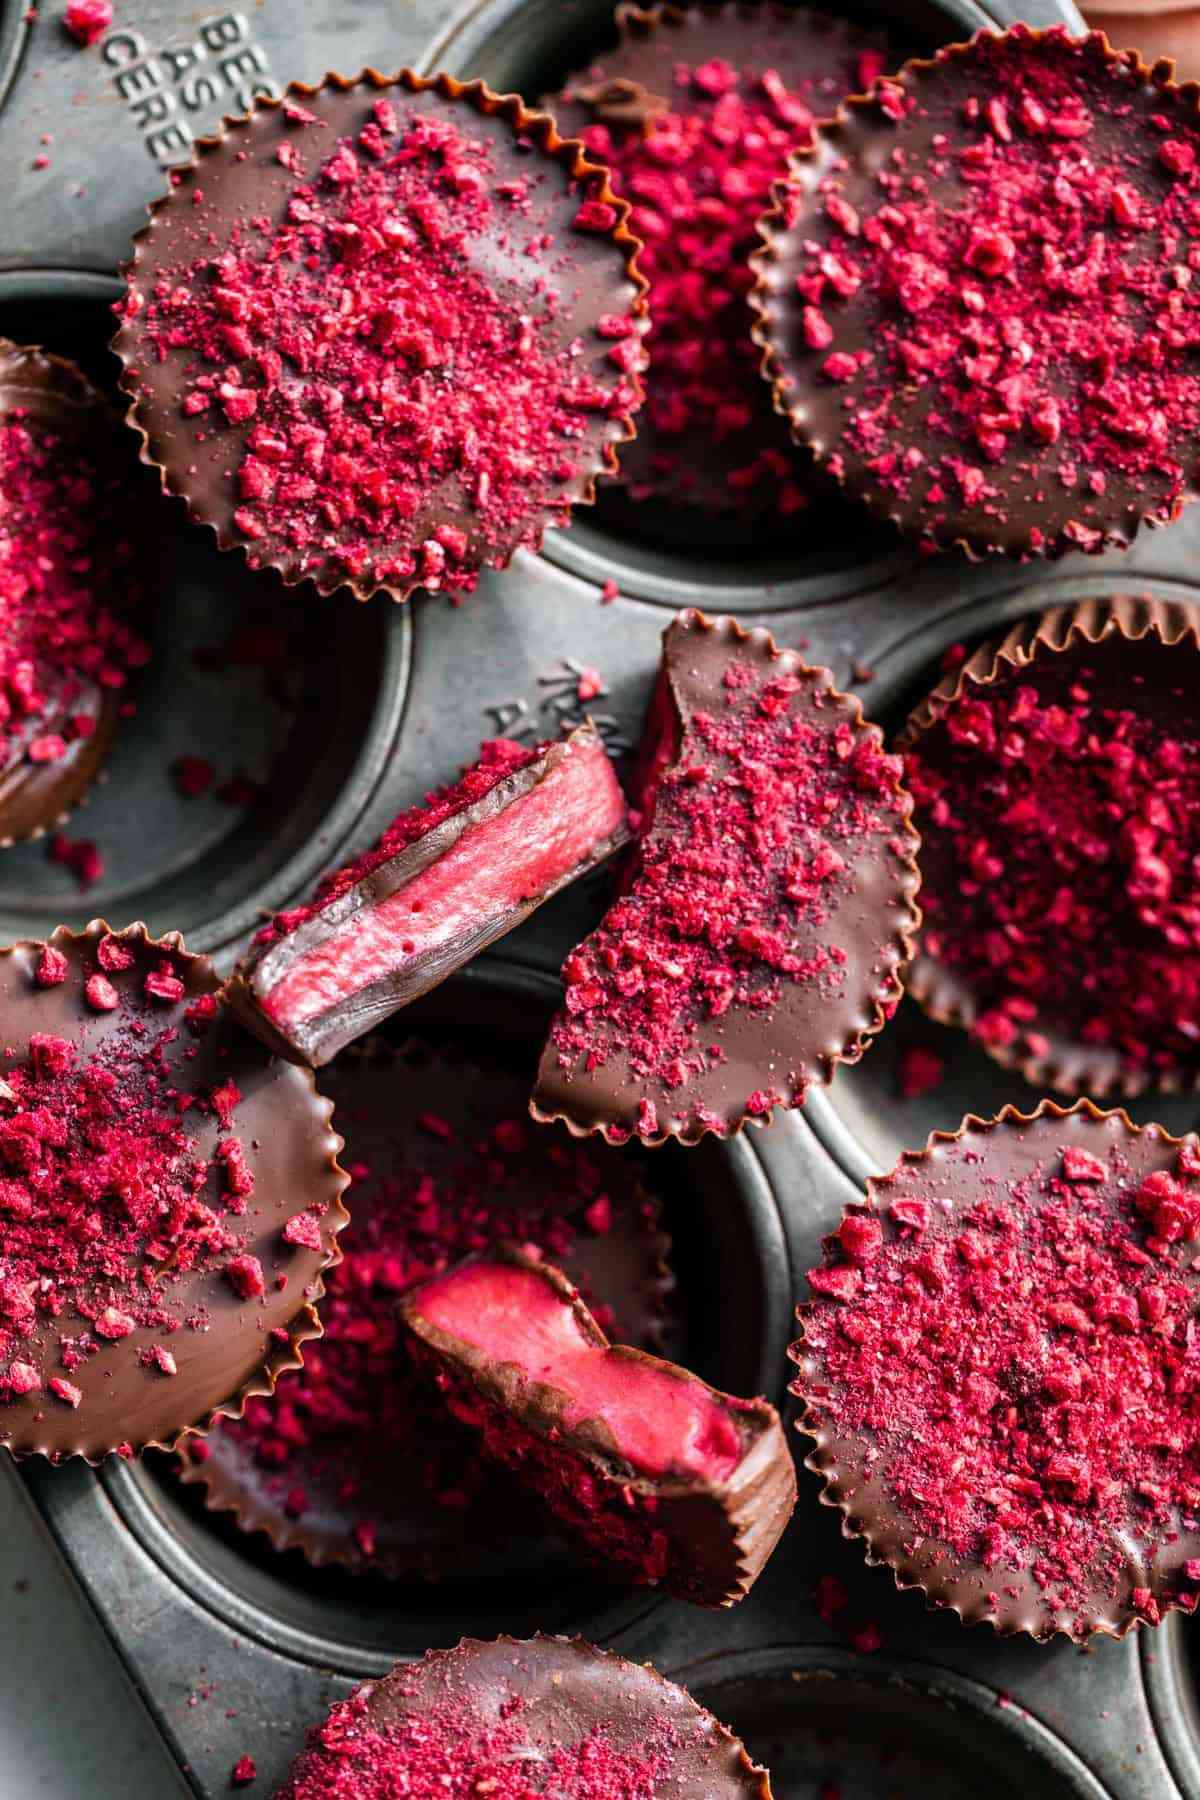 Pile of raspberry cream filled chocolate candy cups topped with raspberry colored sprinkles.